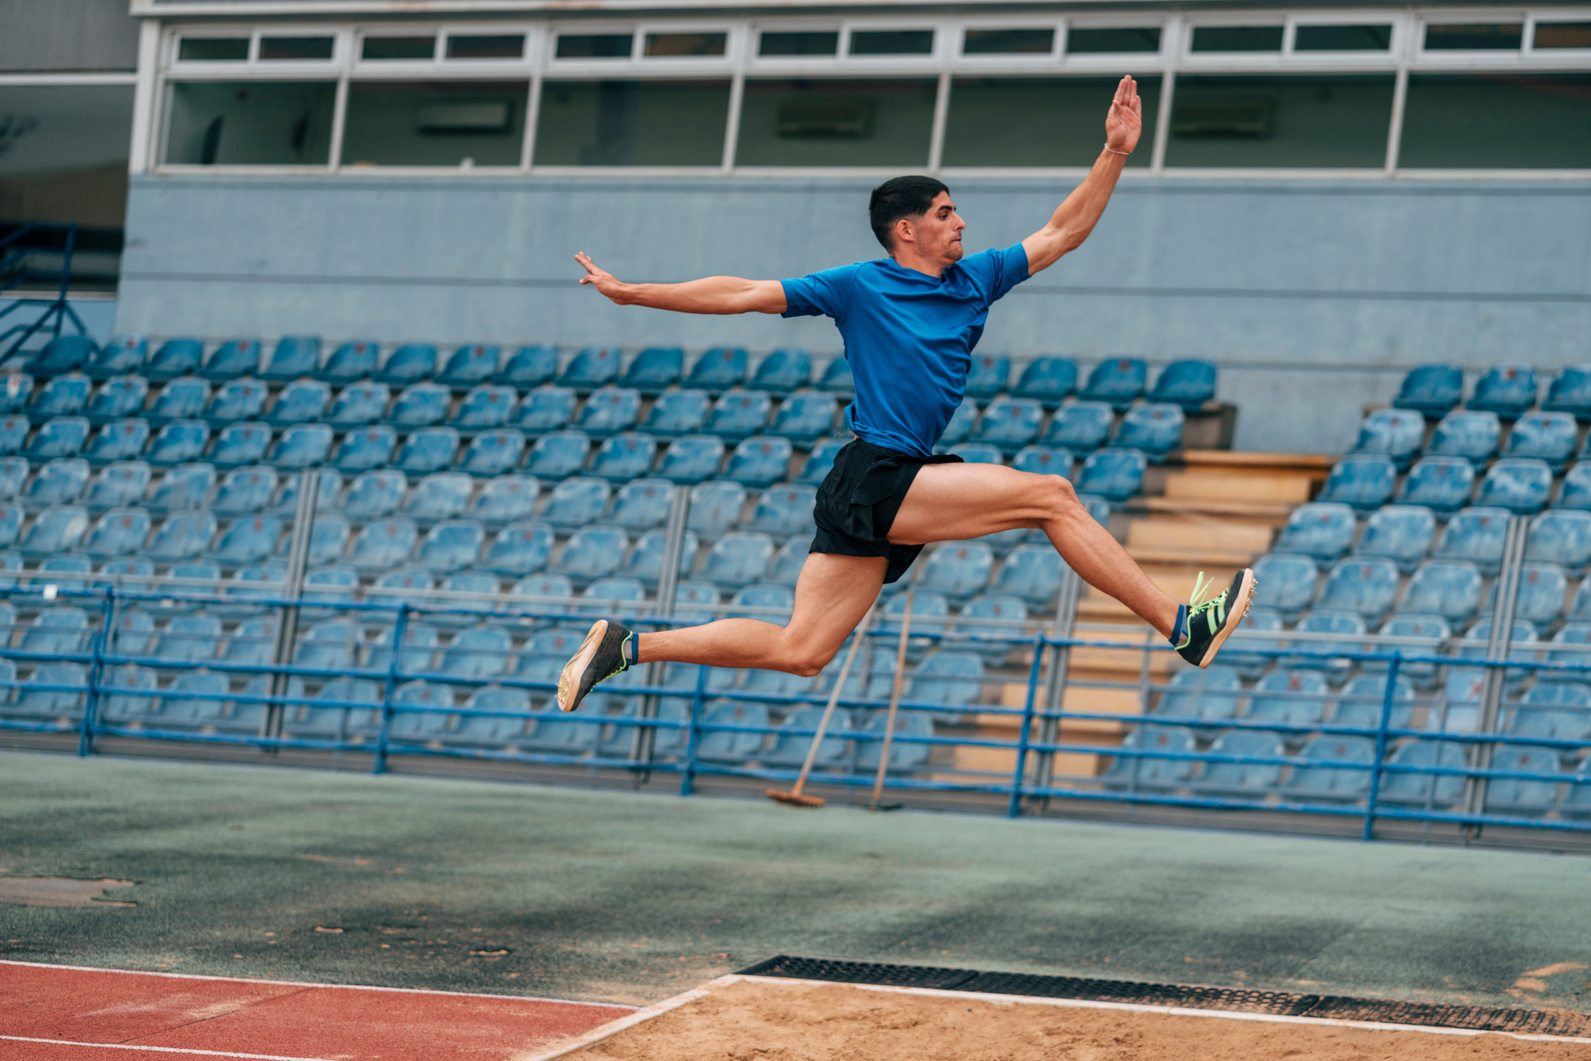 Long jump, Professional Male Athlete Jumping on Long Distance